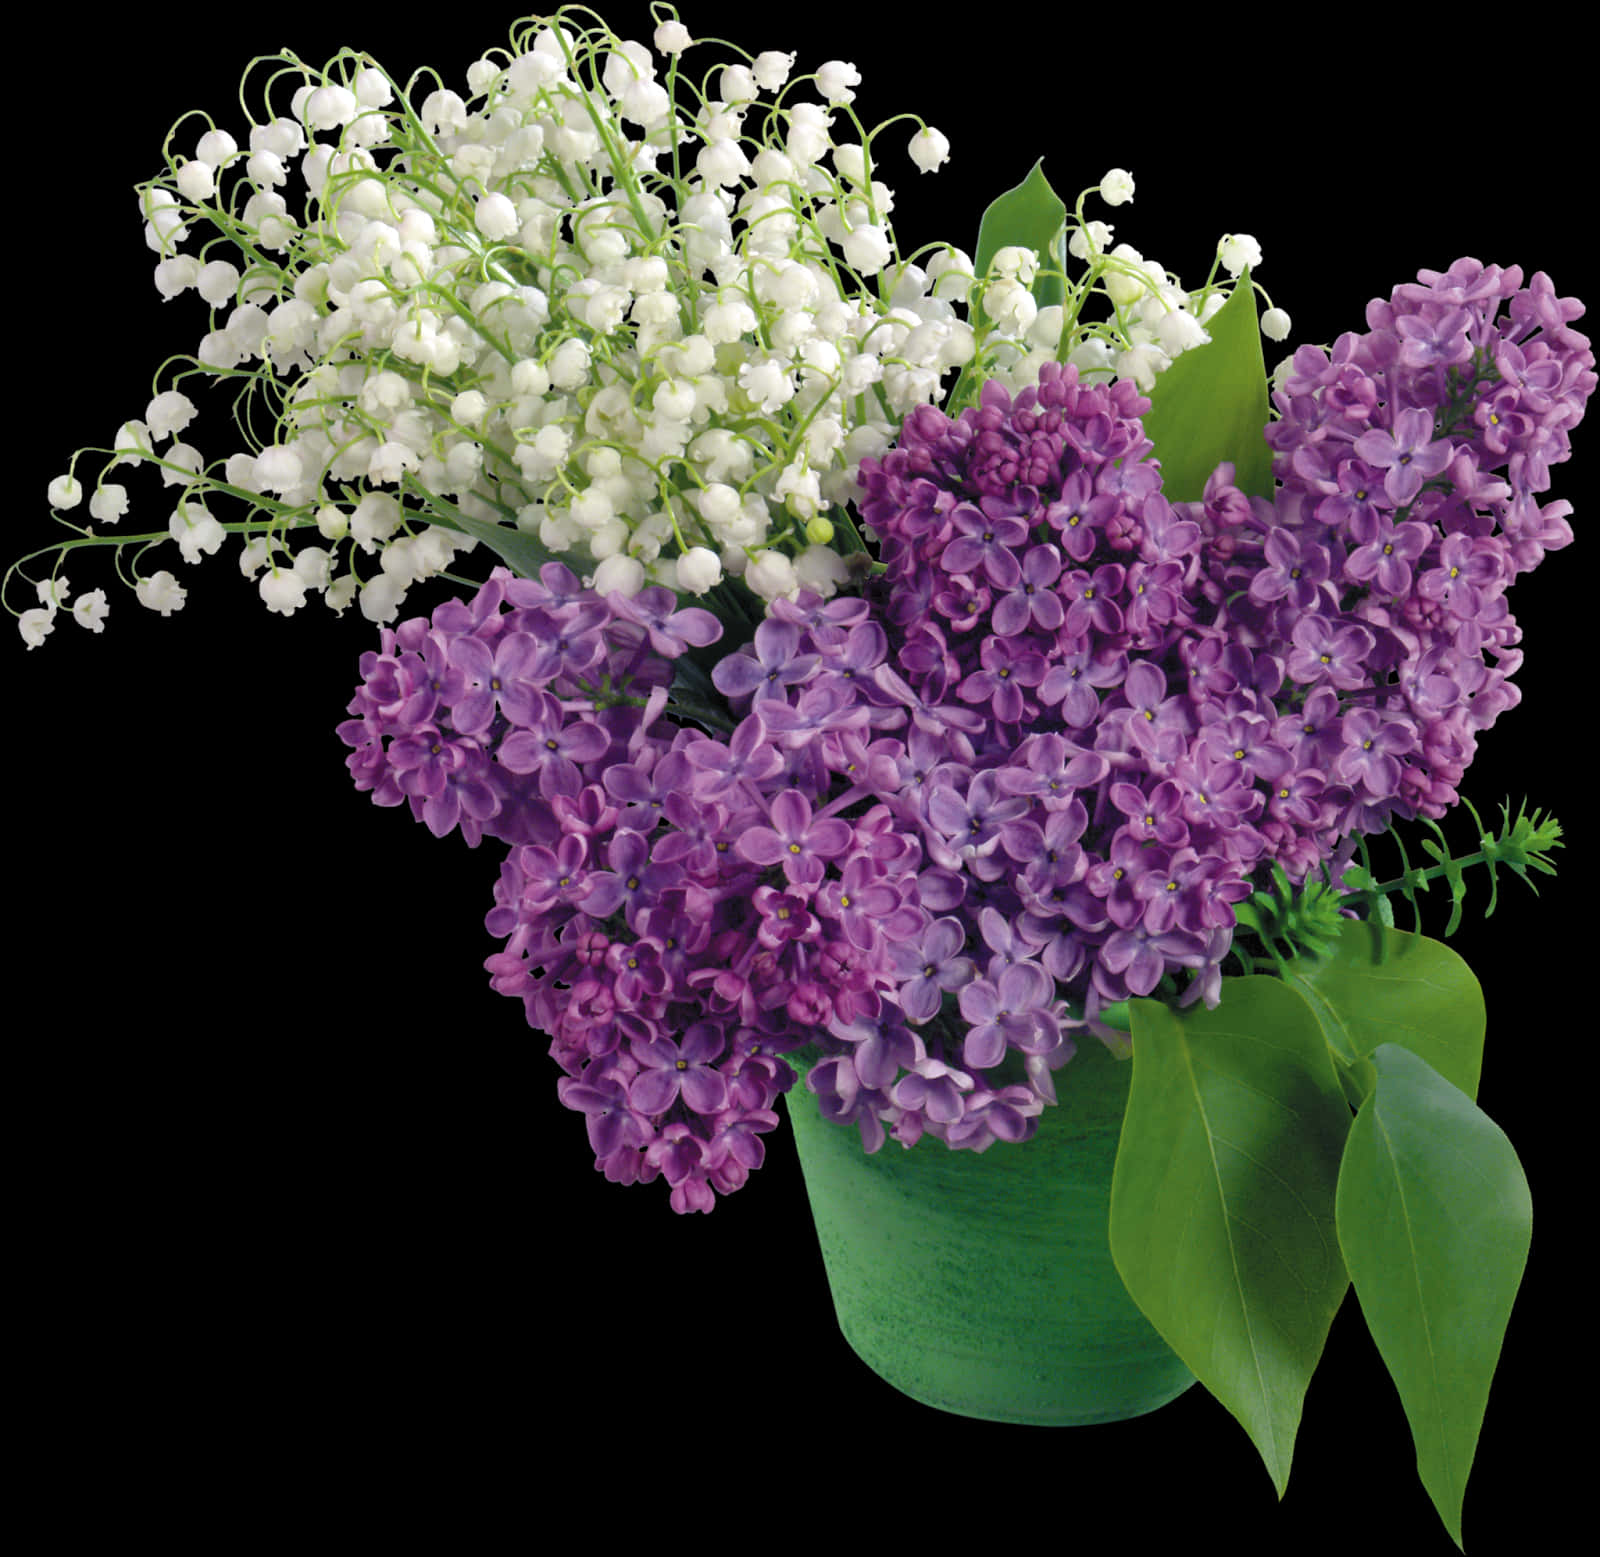 A Bouquet Of Purple And White Flowers